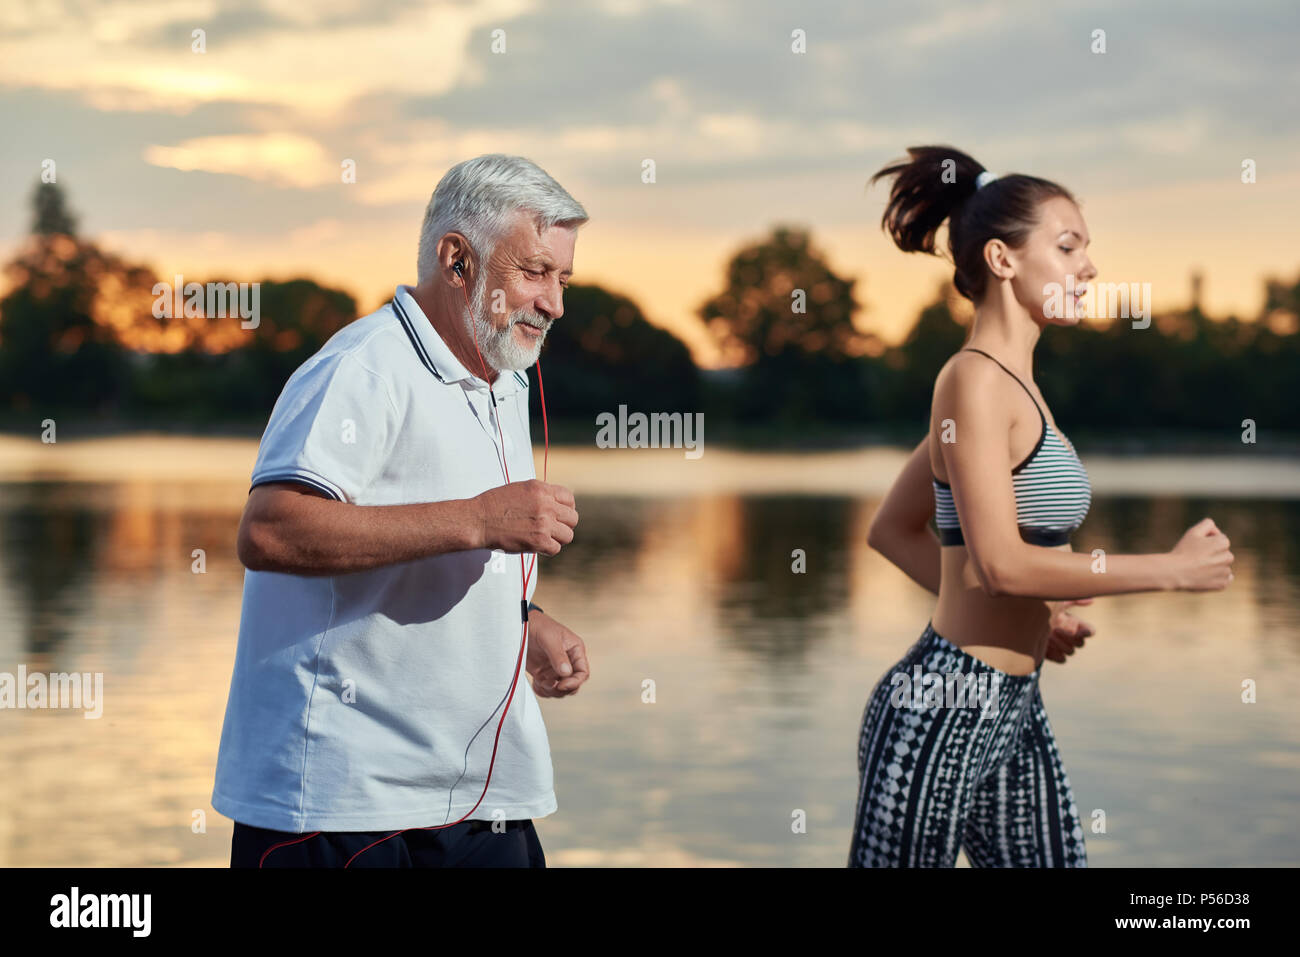 Senior and young generations evening's workout on fresh air. Outdoor activities, healthy lifestyle, strong bodies, fit figures. Stylish, modern sportswear. Different generations. Sport, yoga, fitness Stock Photo